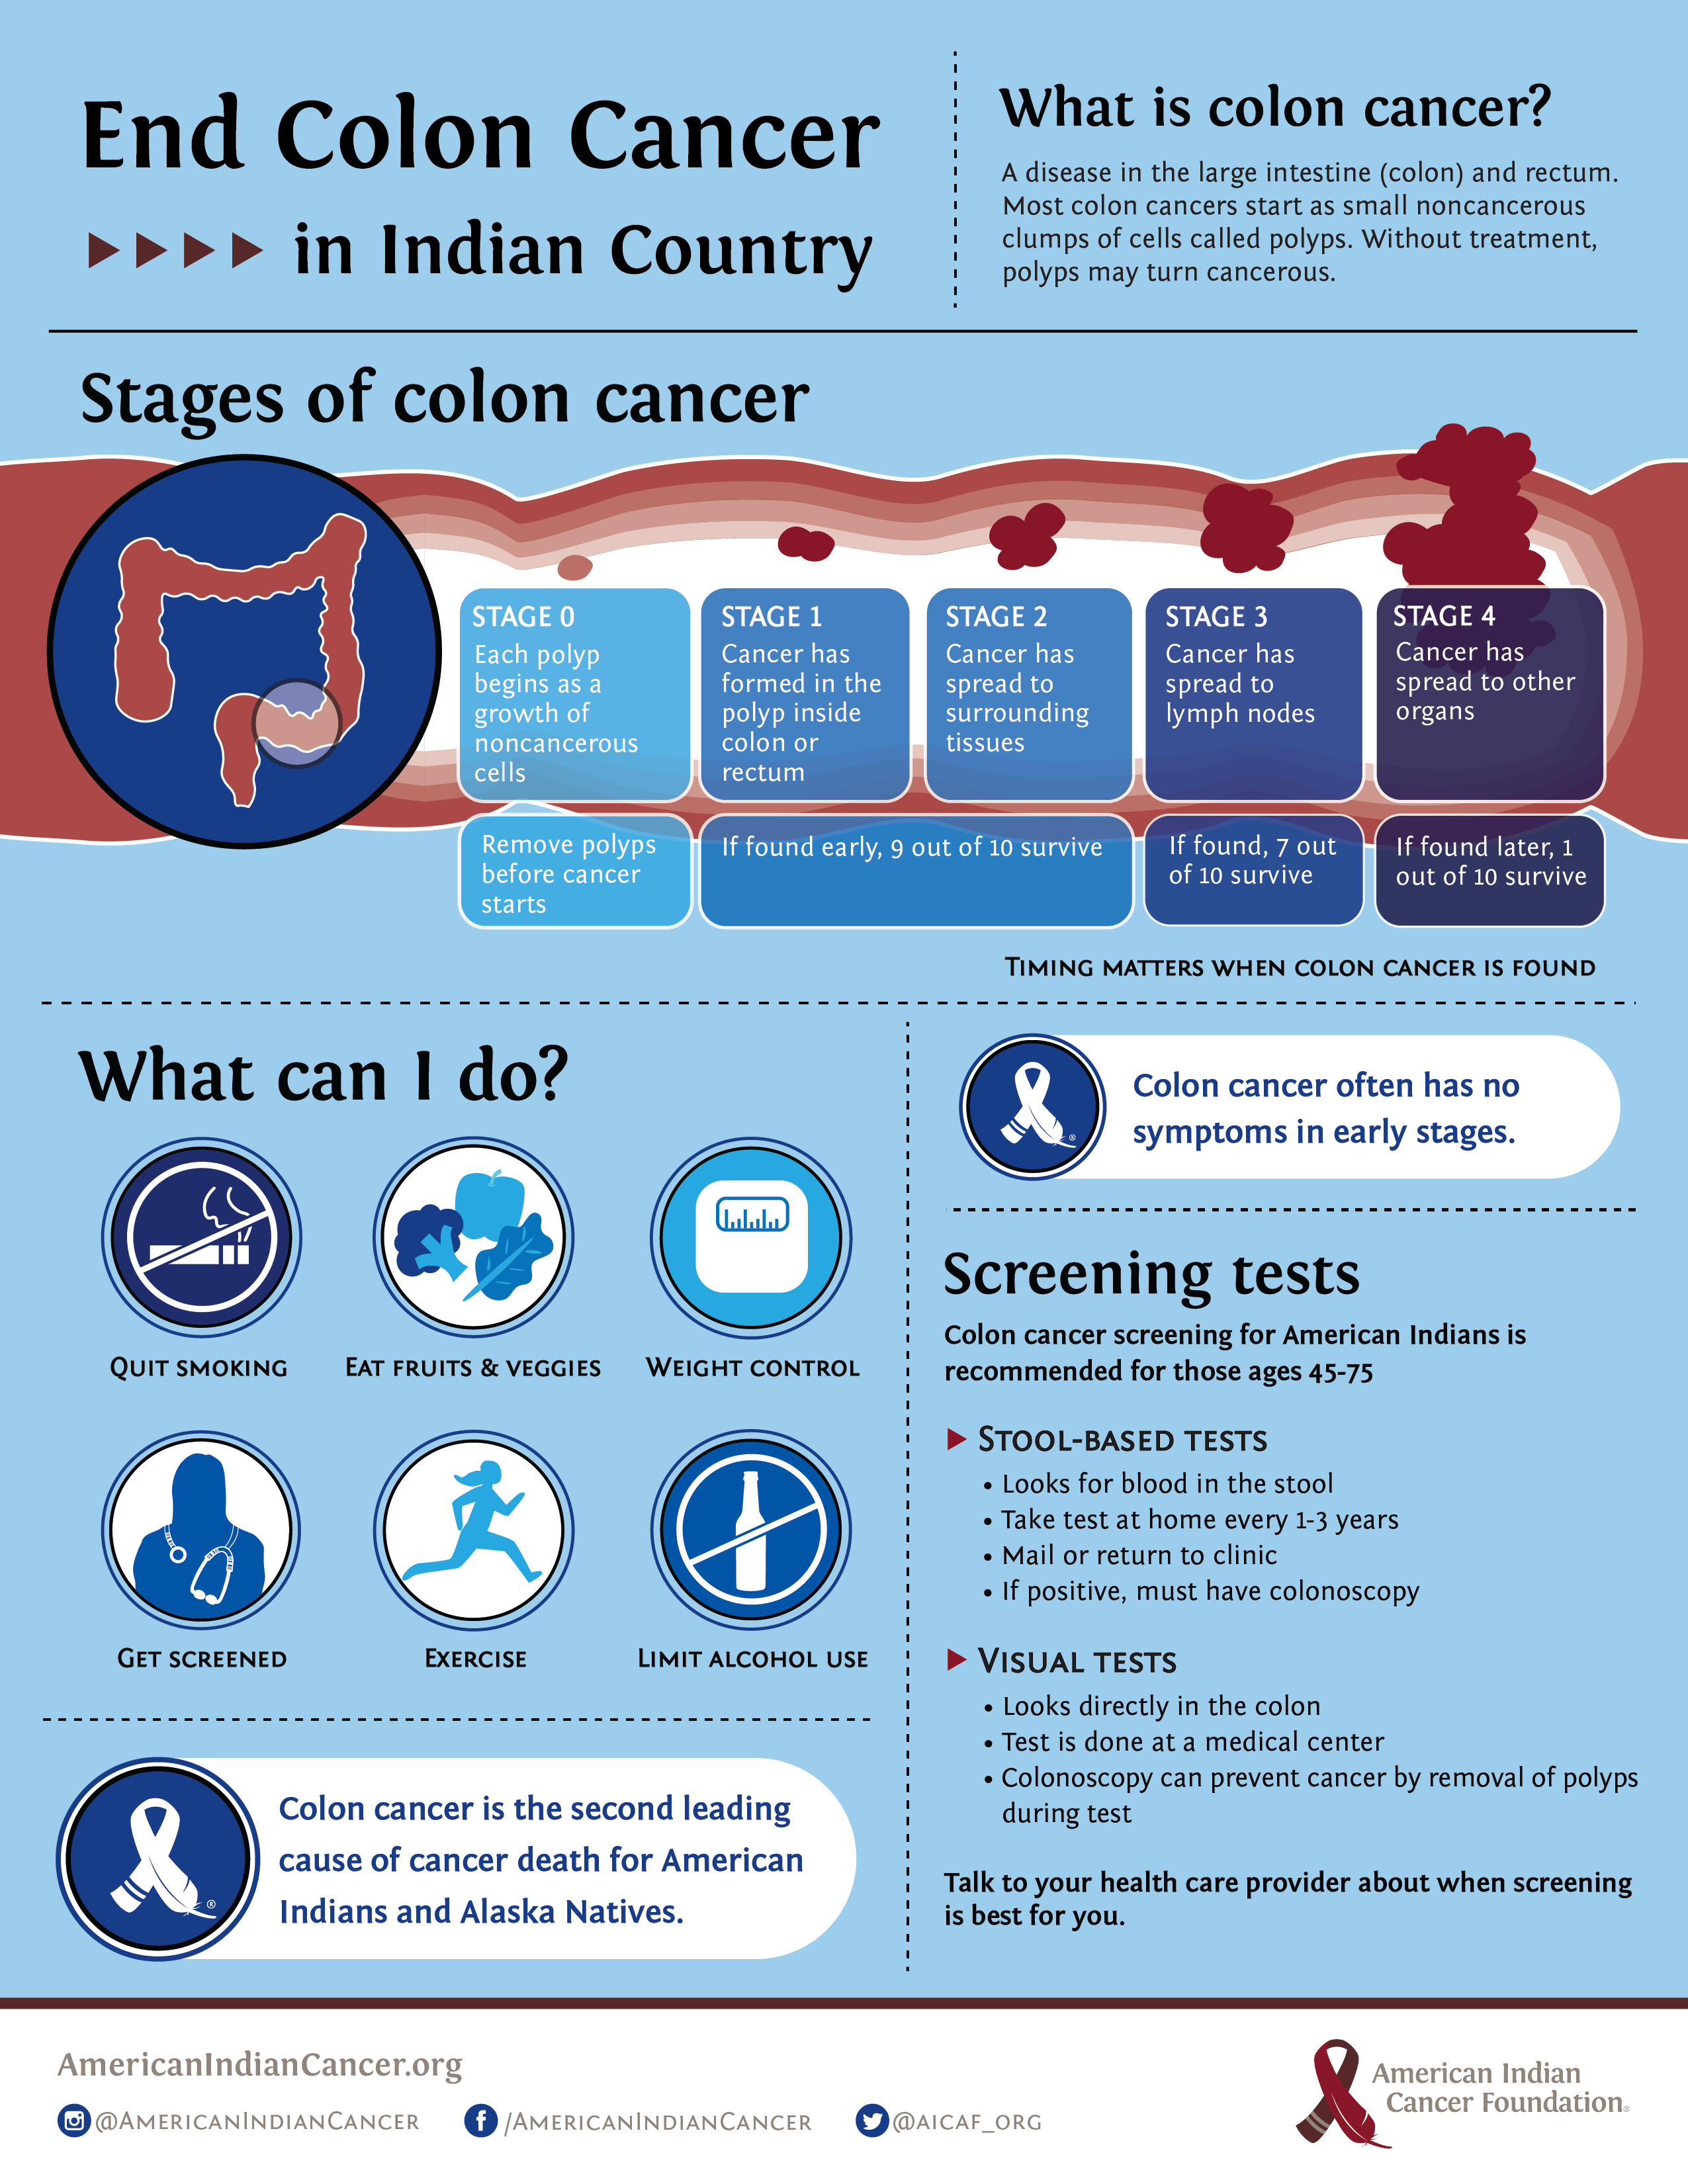 Colorectal cancer quality of life and symptoms